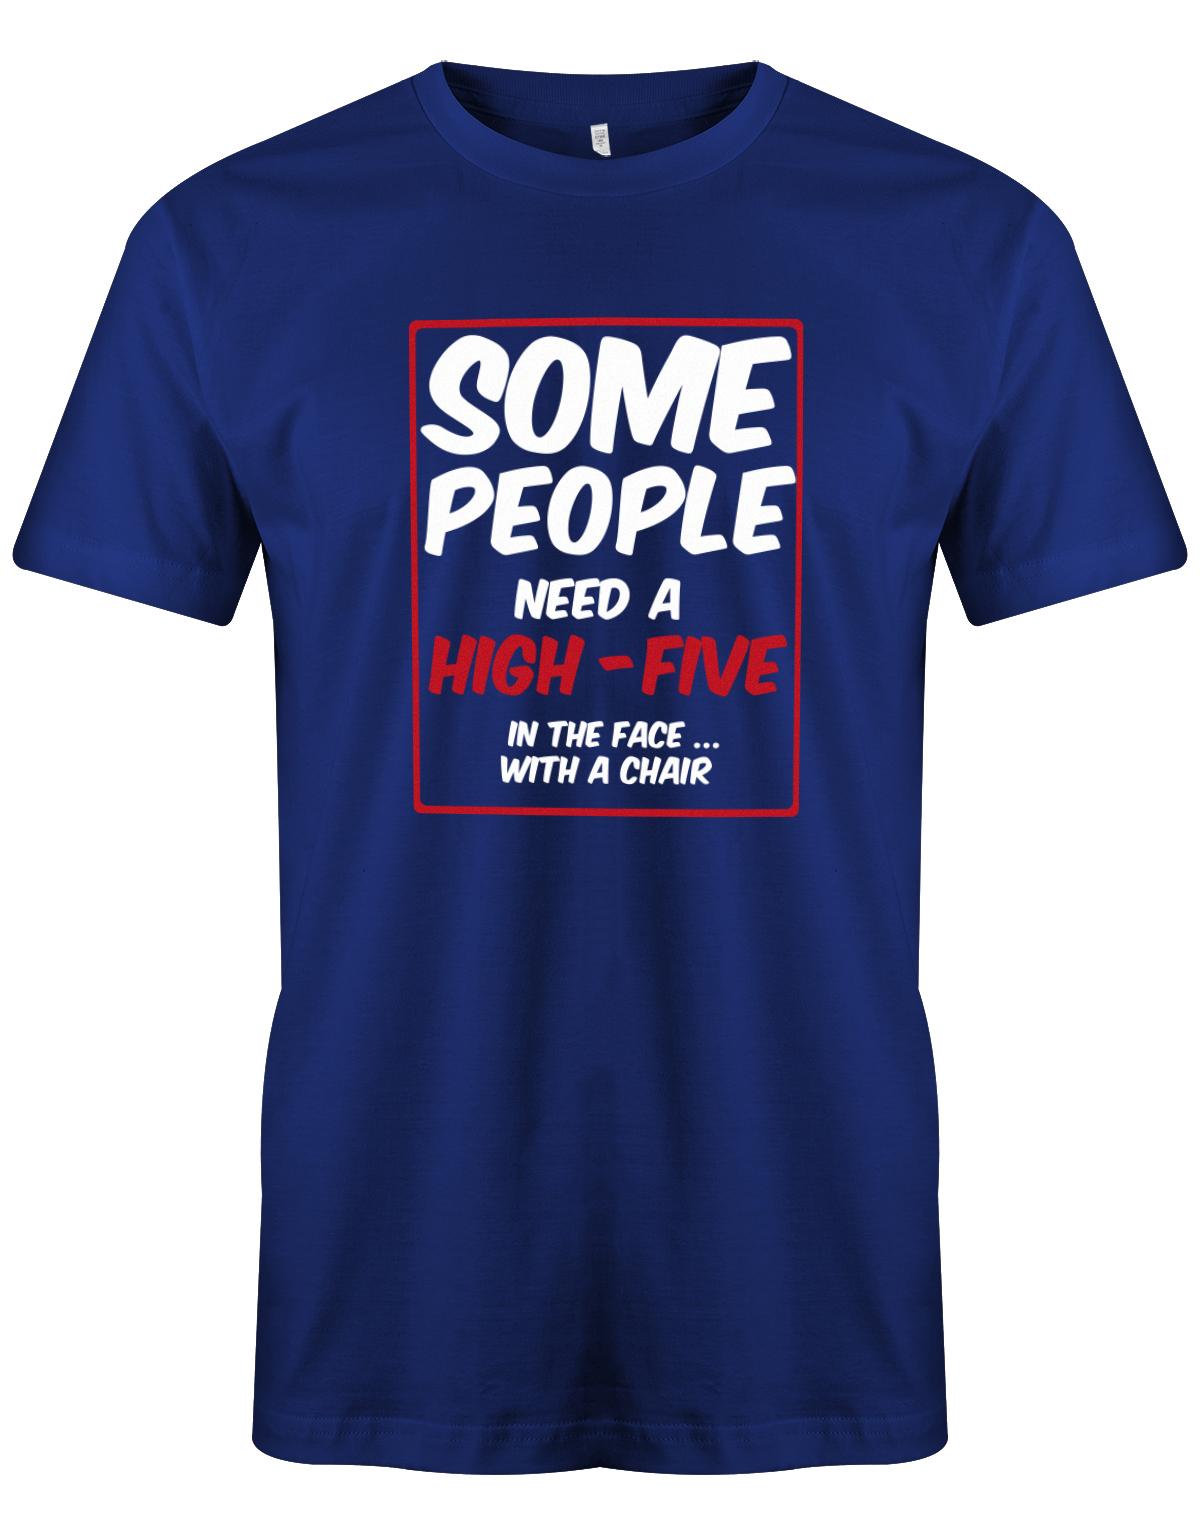 Some-People-need-a-High-Five-In-the-Face-with-a-Chair-Herren-Shirt-Royalblau